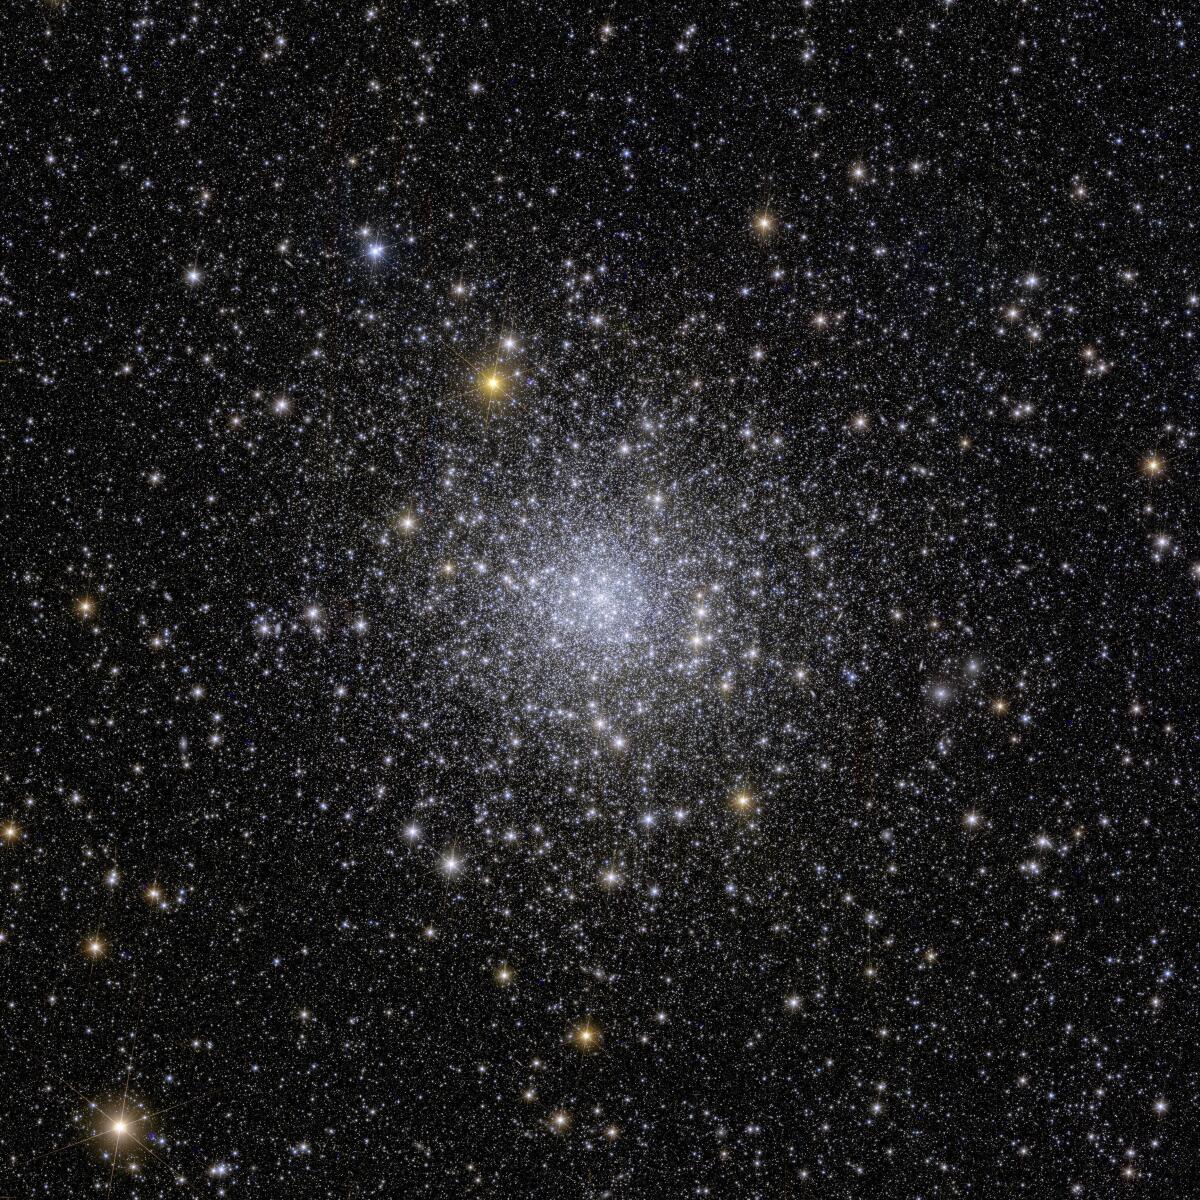 This image provided by the European Space Agency shows Euclid’s view of on a globular cluster called NGC 6397. 